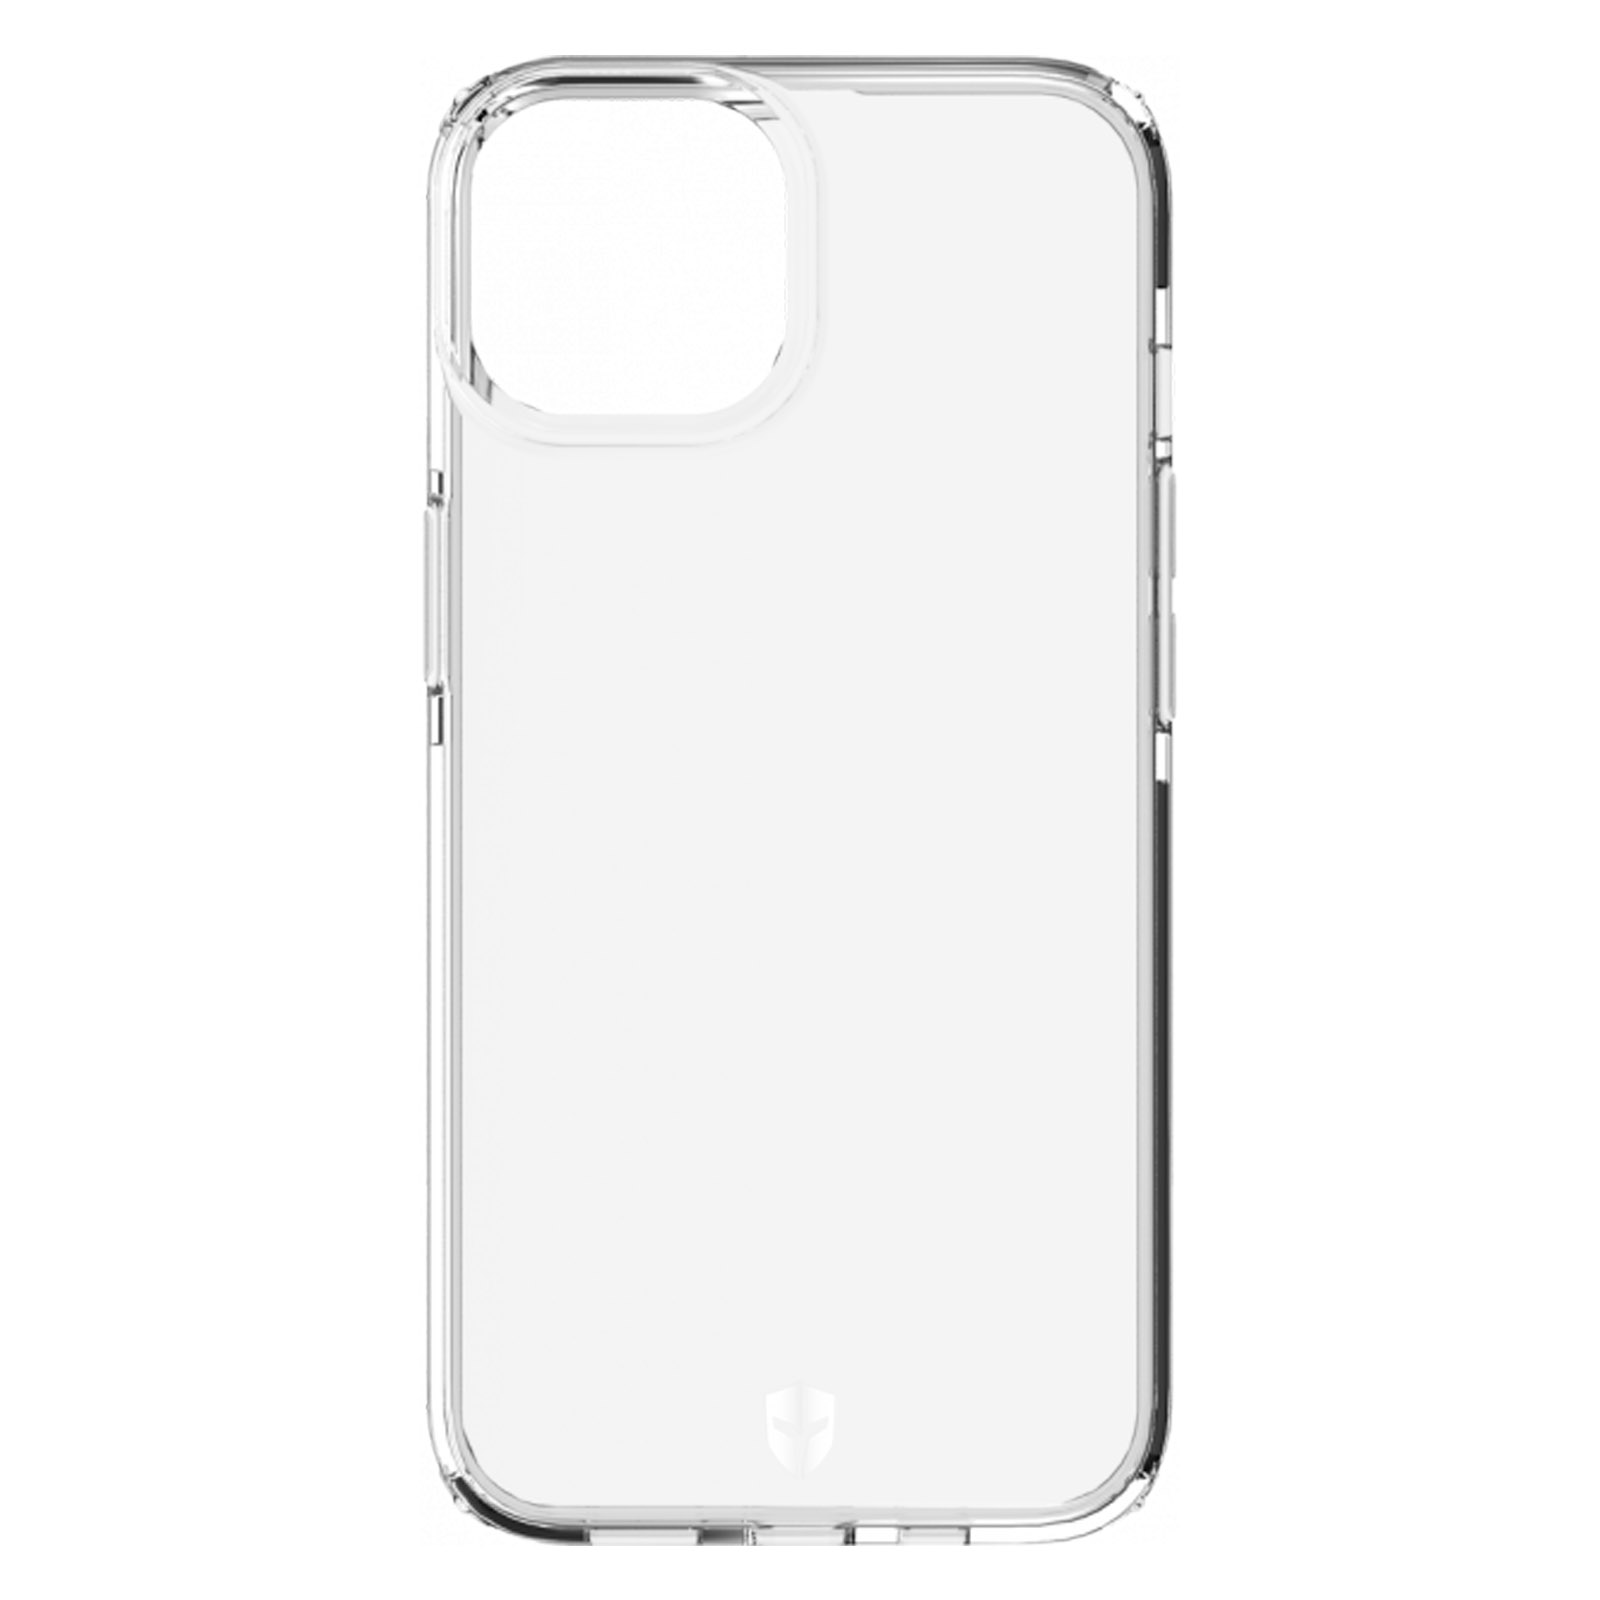 Feel Backcover, 14, Transparent CASE FORCE iPhone Apple, Handyhülle Series,